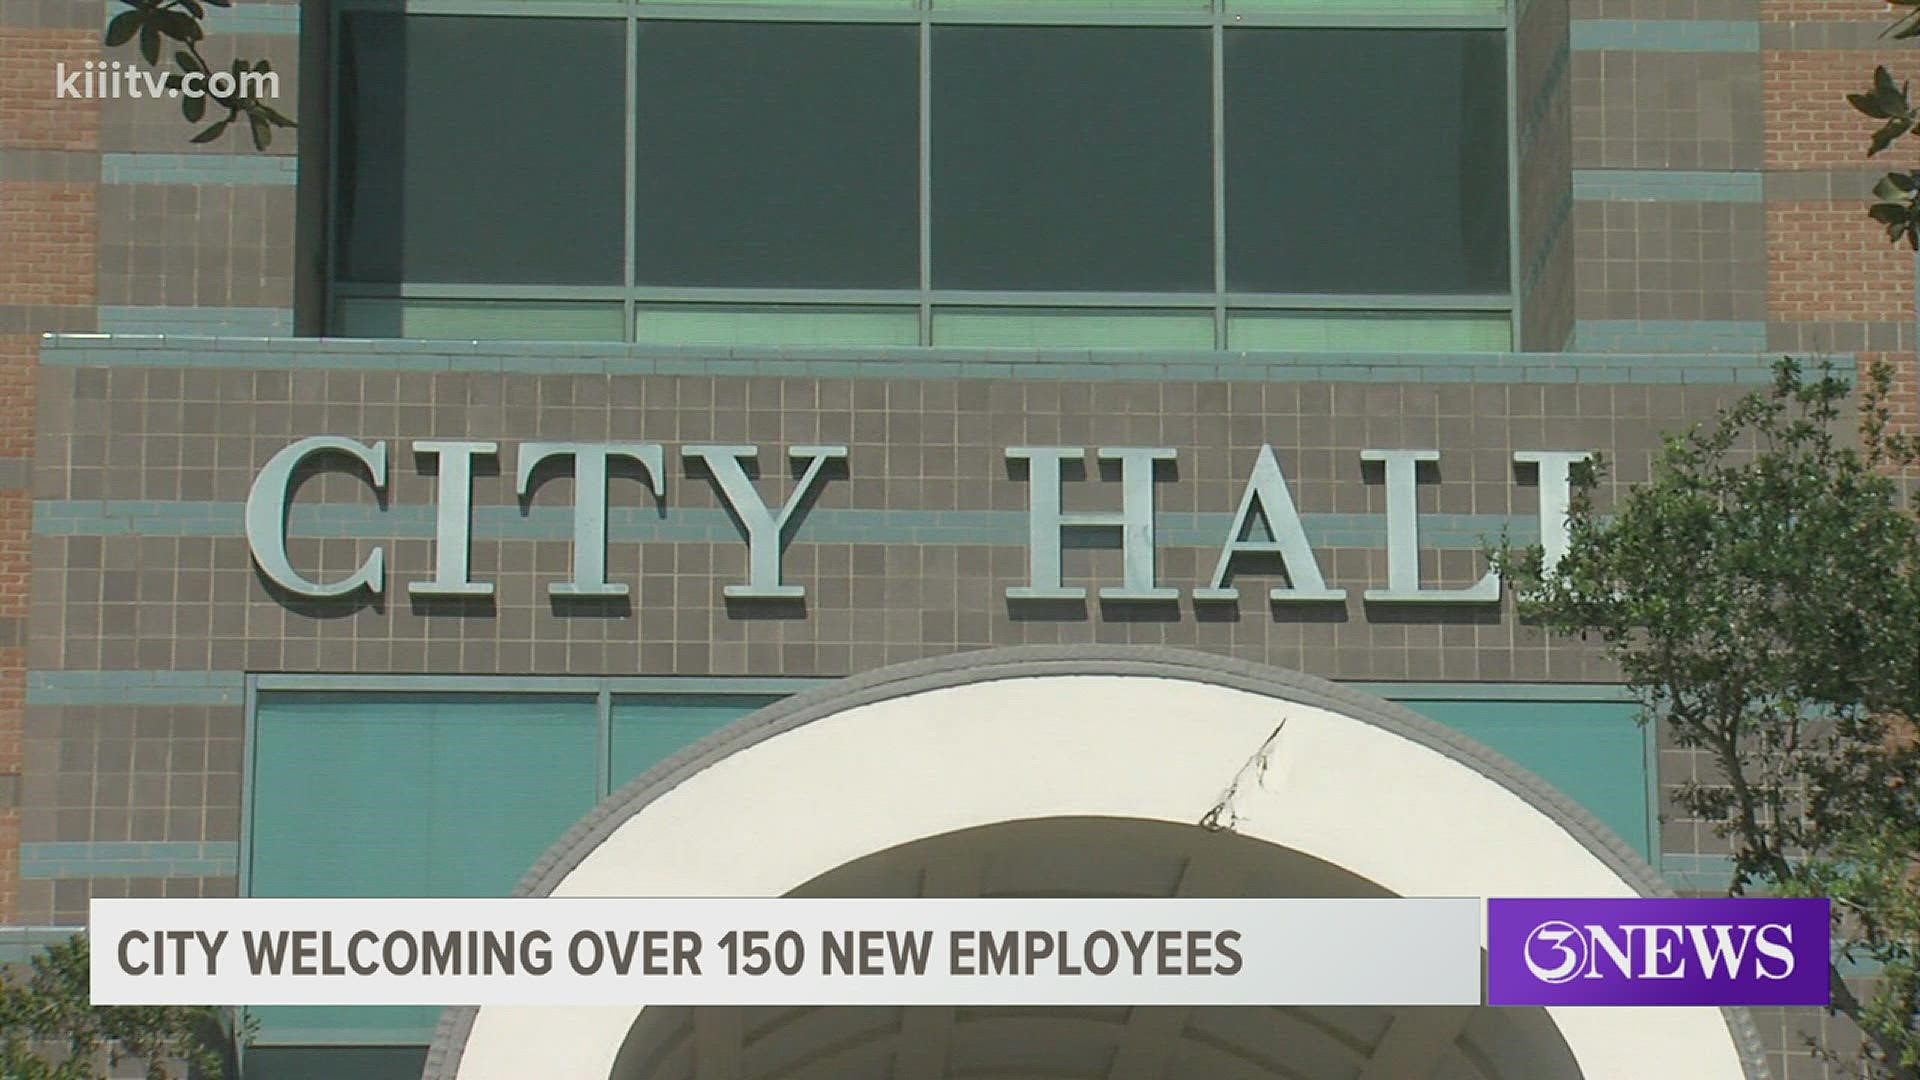 City Manager Peter Zanoni, said that the city is looking to hire another 160 employees.